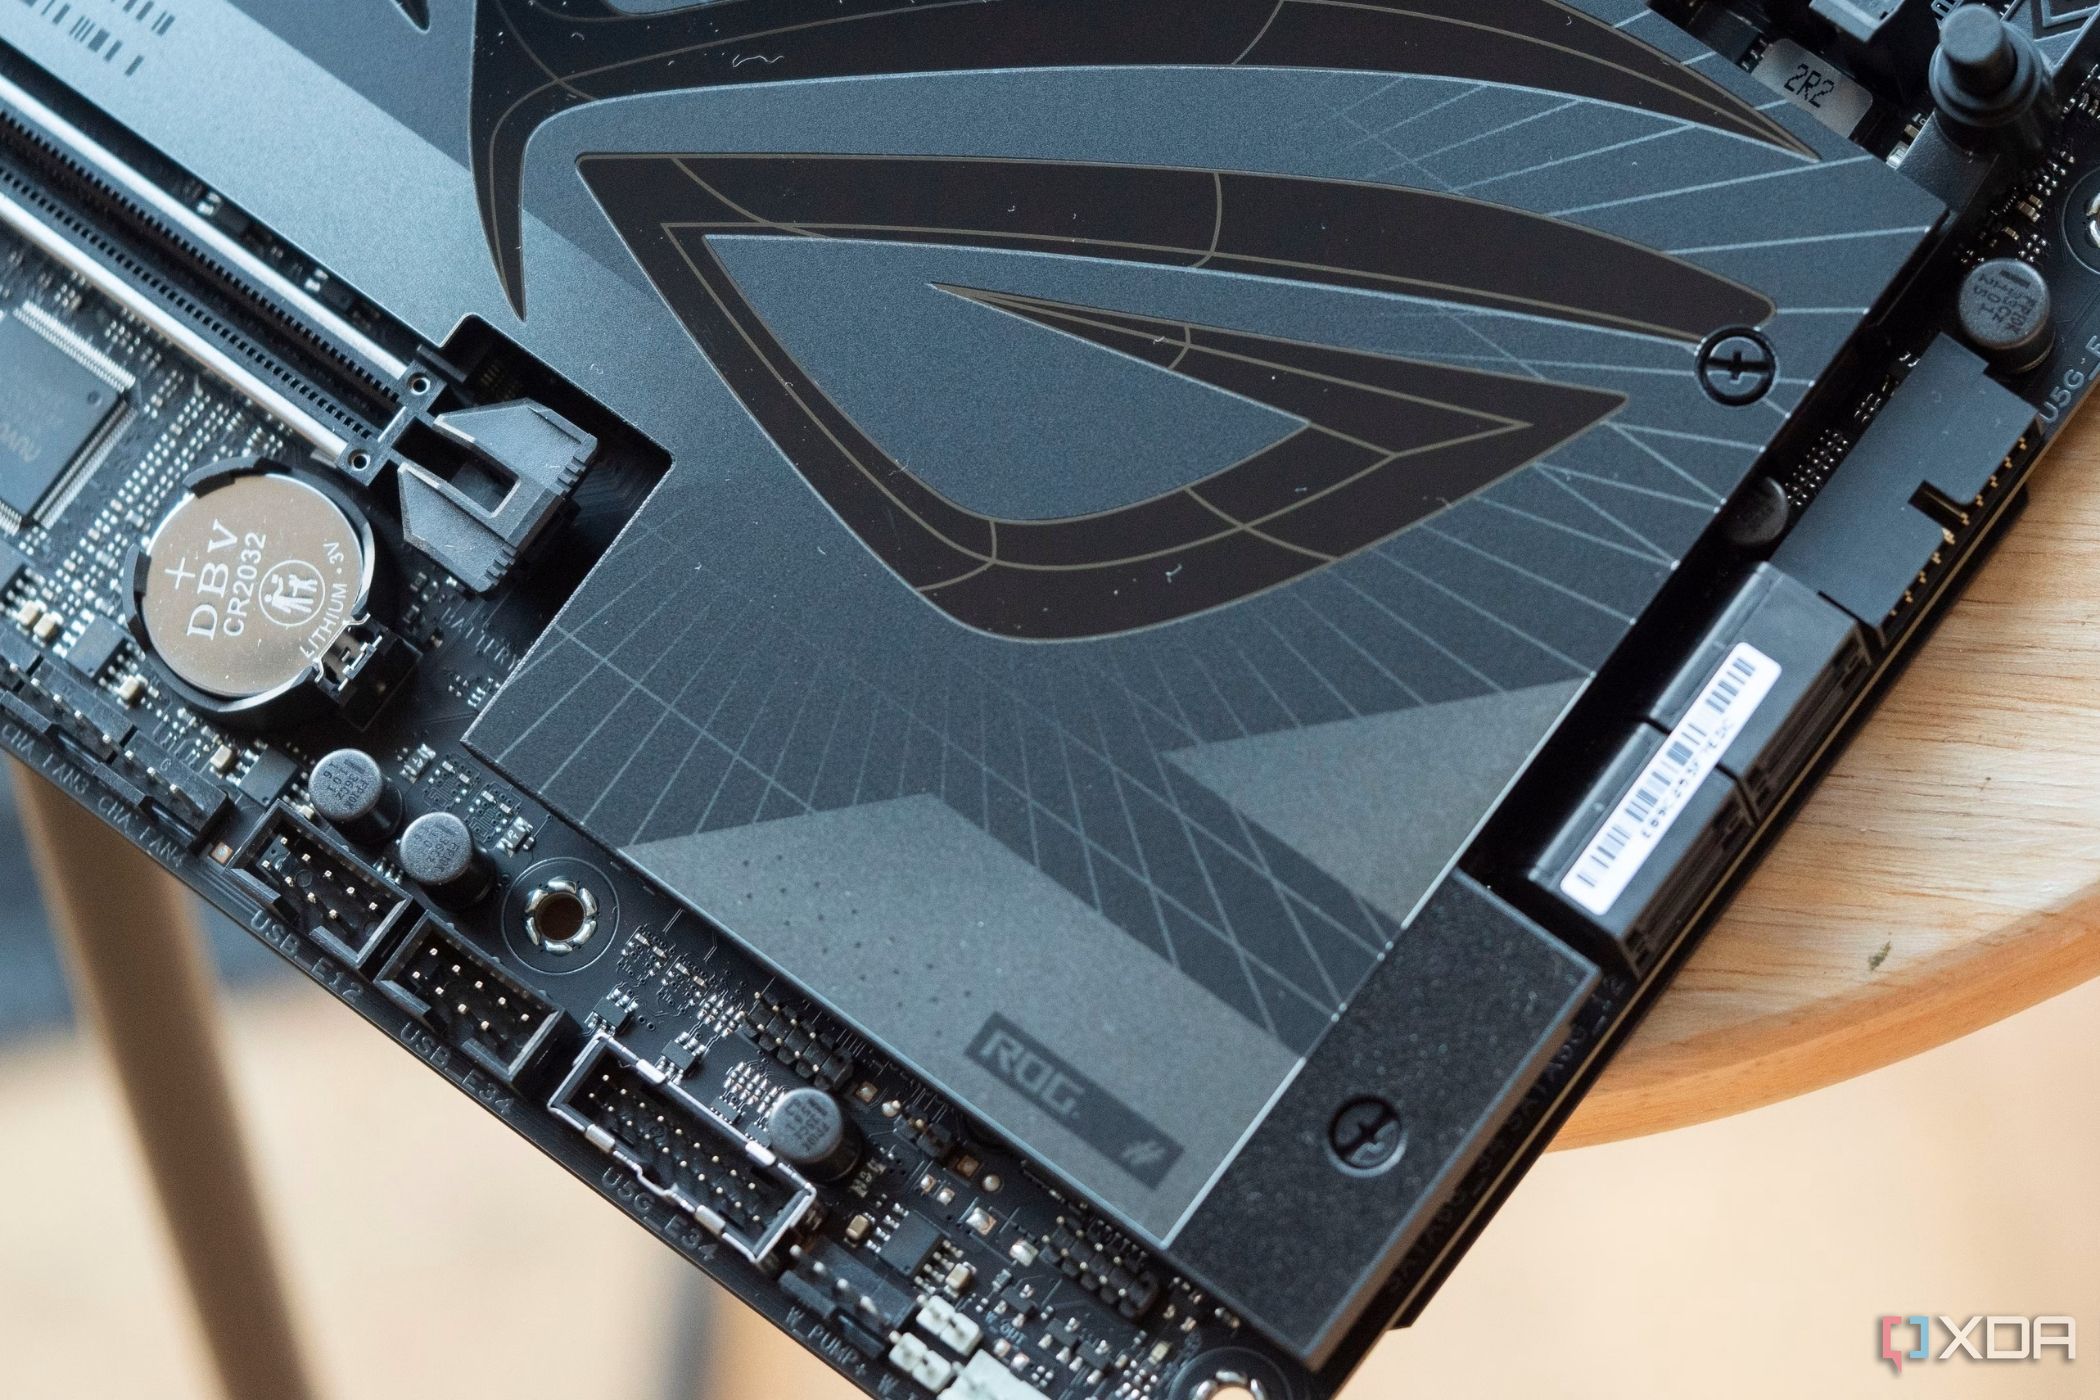 An image showing the ROG branding on an ASUS ROG gaming motherboard.